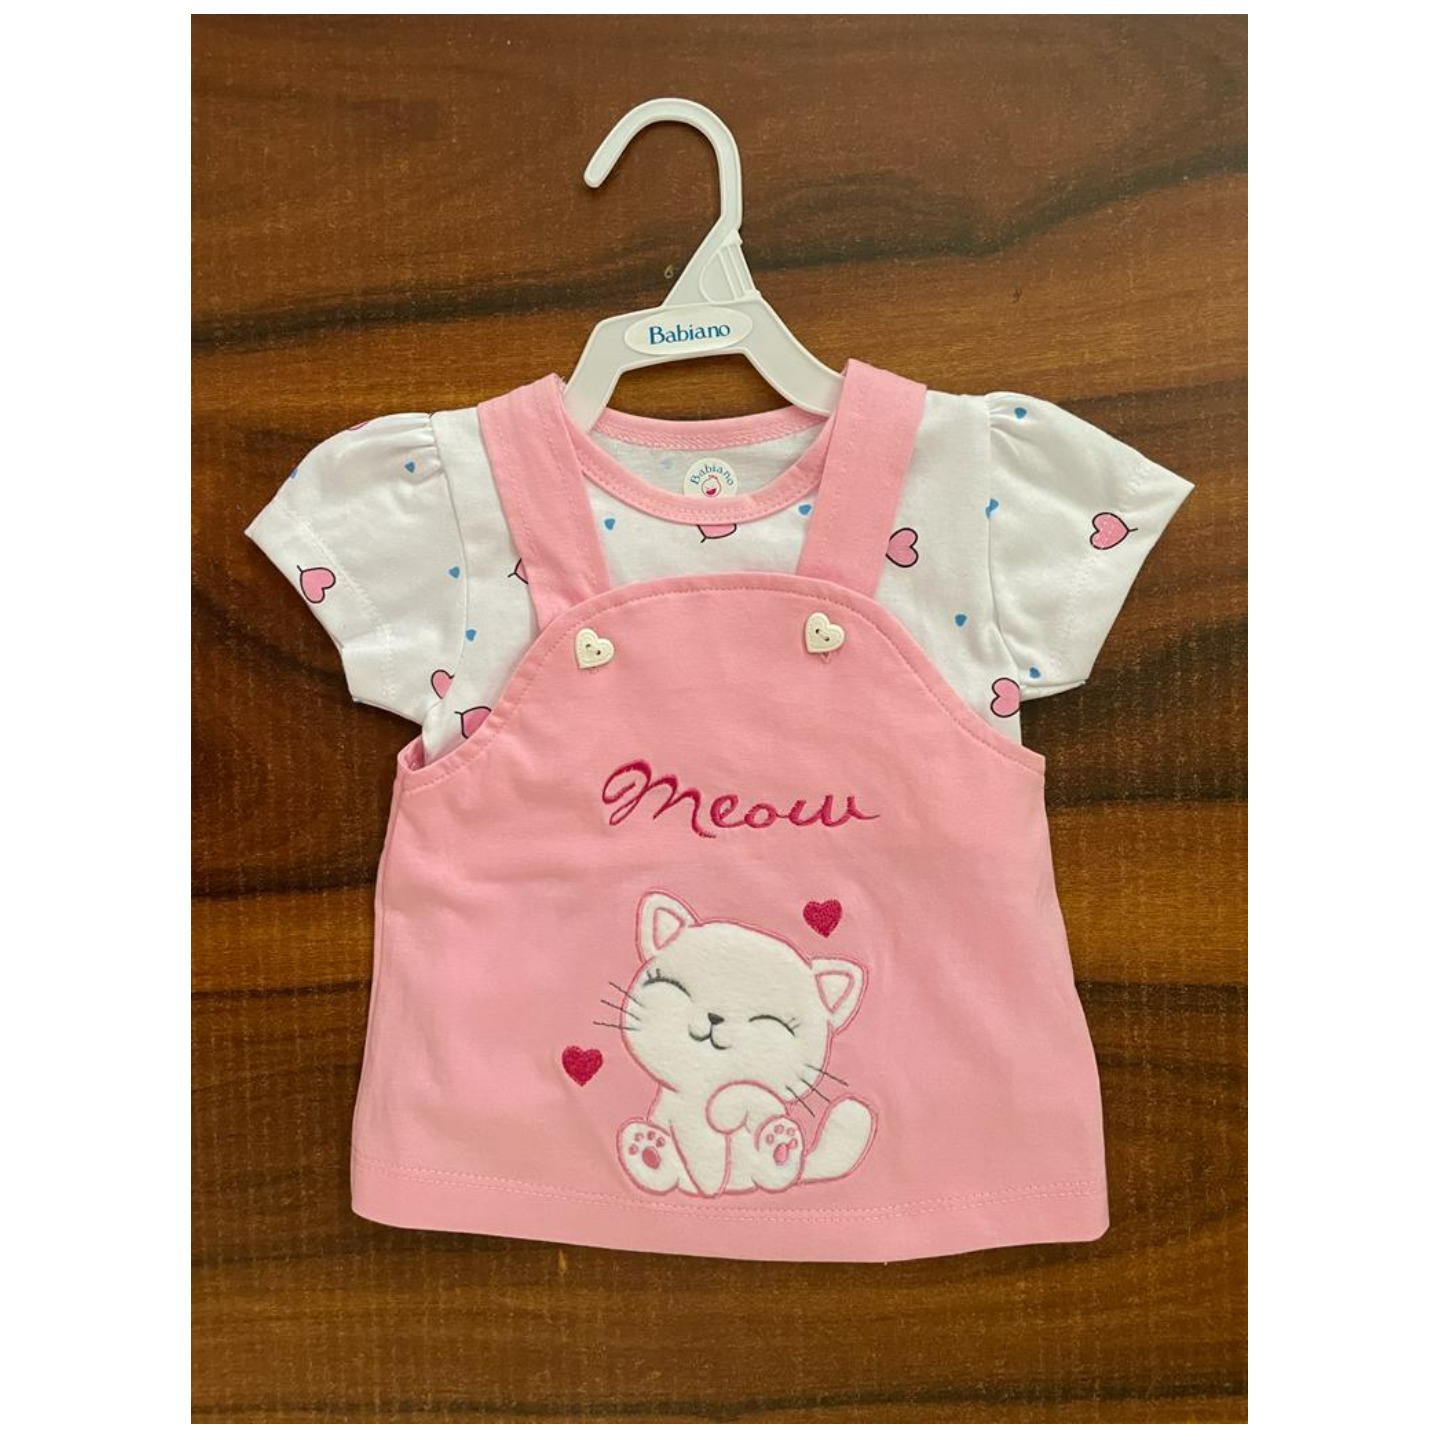 Babiano Girls Meow PINAFORE SET Rs 520 Only Small to 1.5 Years Size